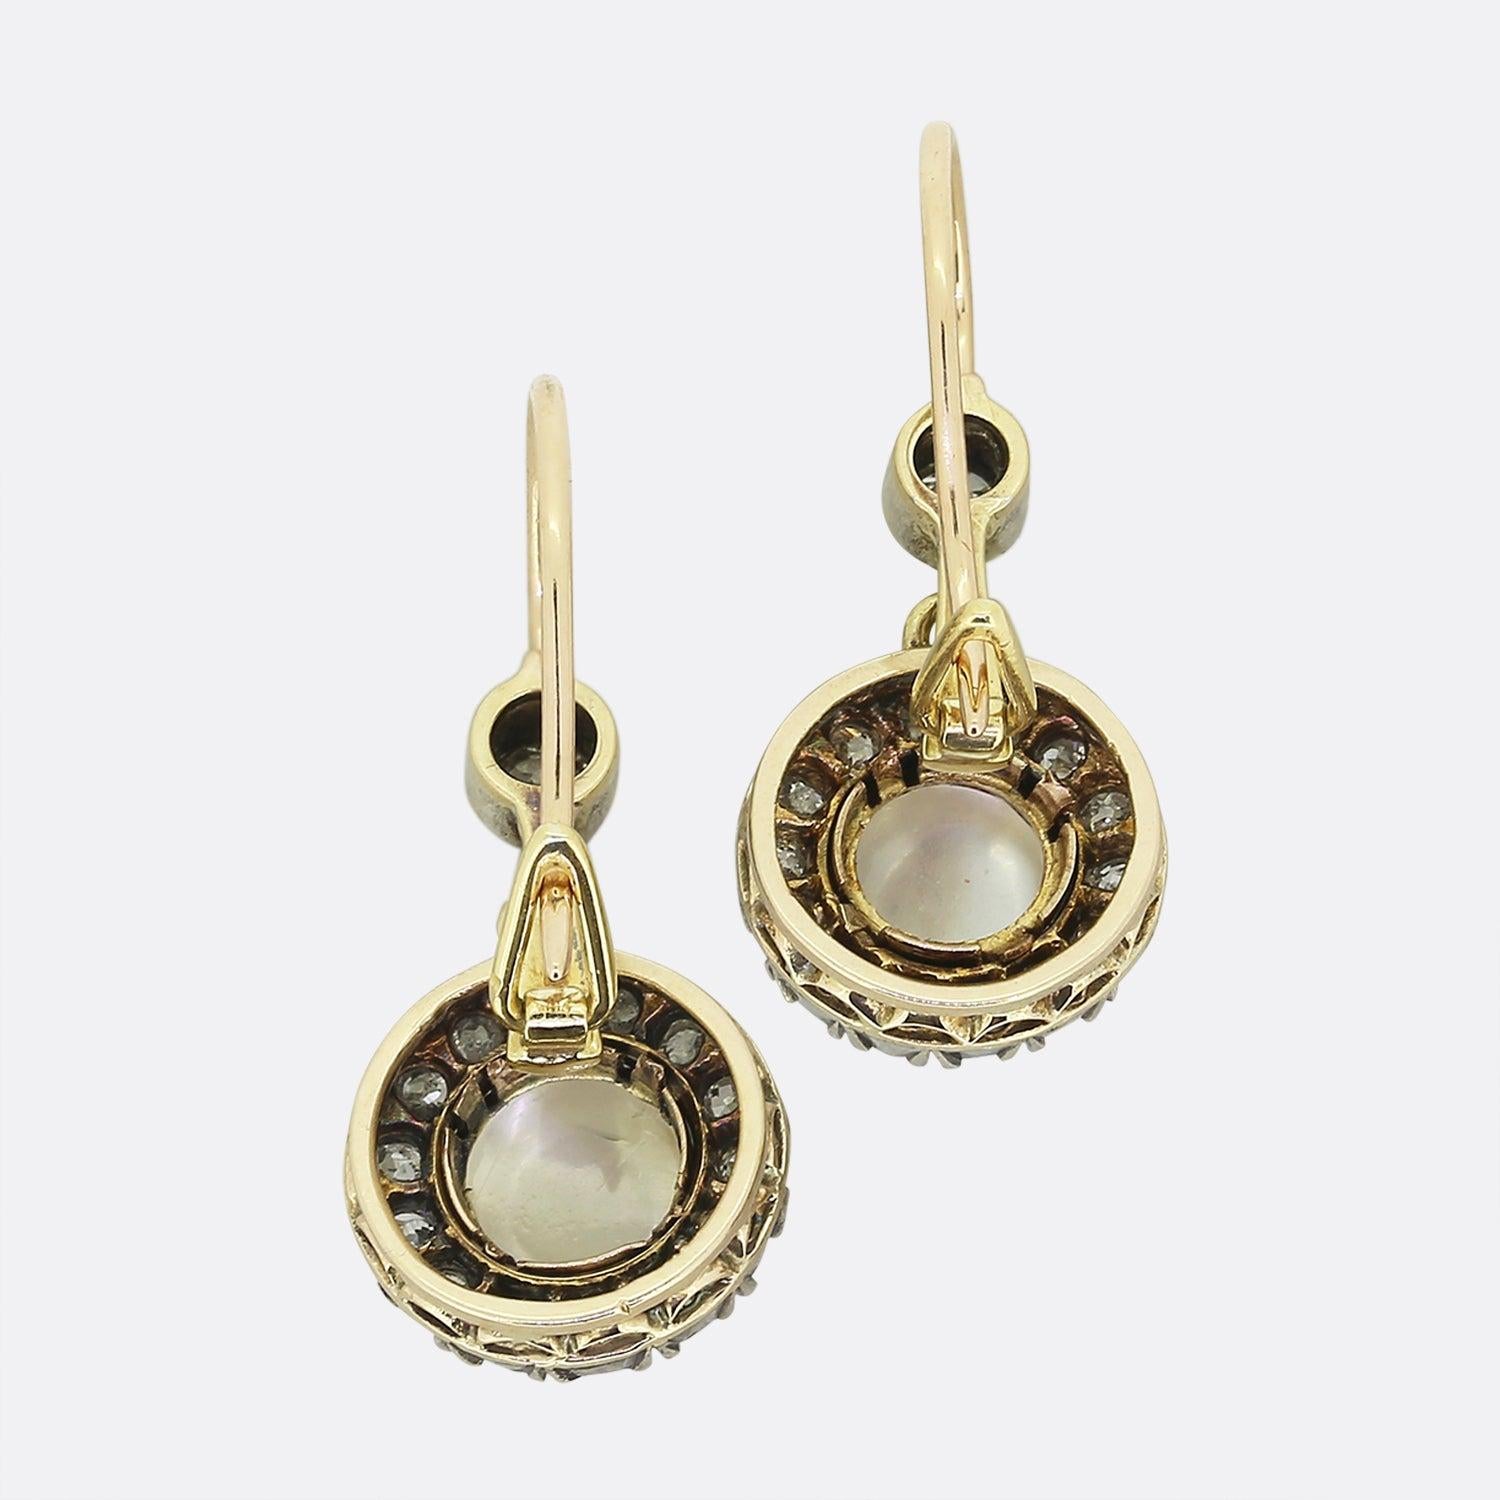 Here we have a lovely pair of moonstone and diamond drop earrings that date back to the Victorian era. The cabochon moonstones are surrounded by 14 old cut diamonds and there is a single old cut diamond set at the top. They feature a French hook